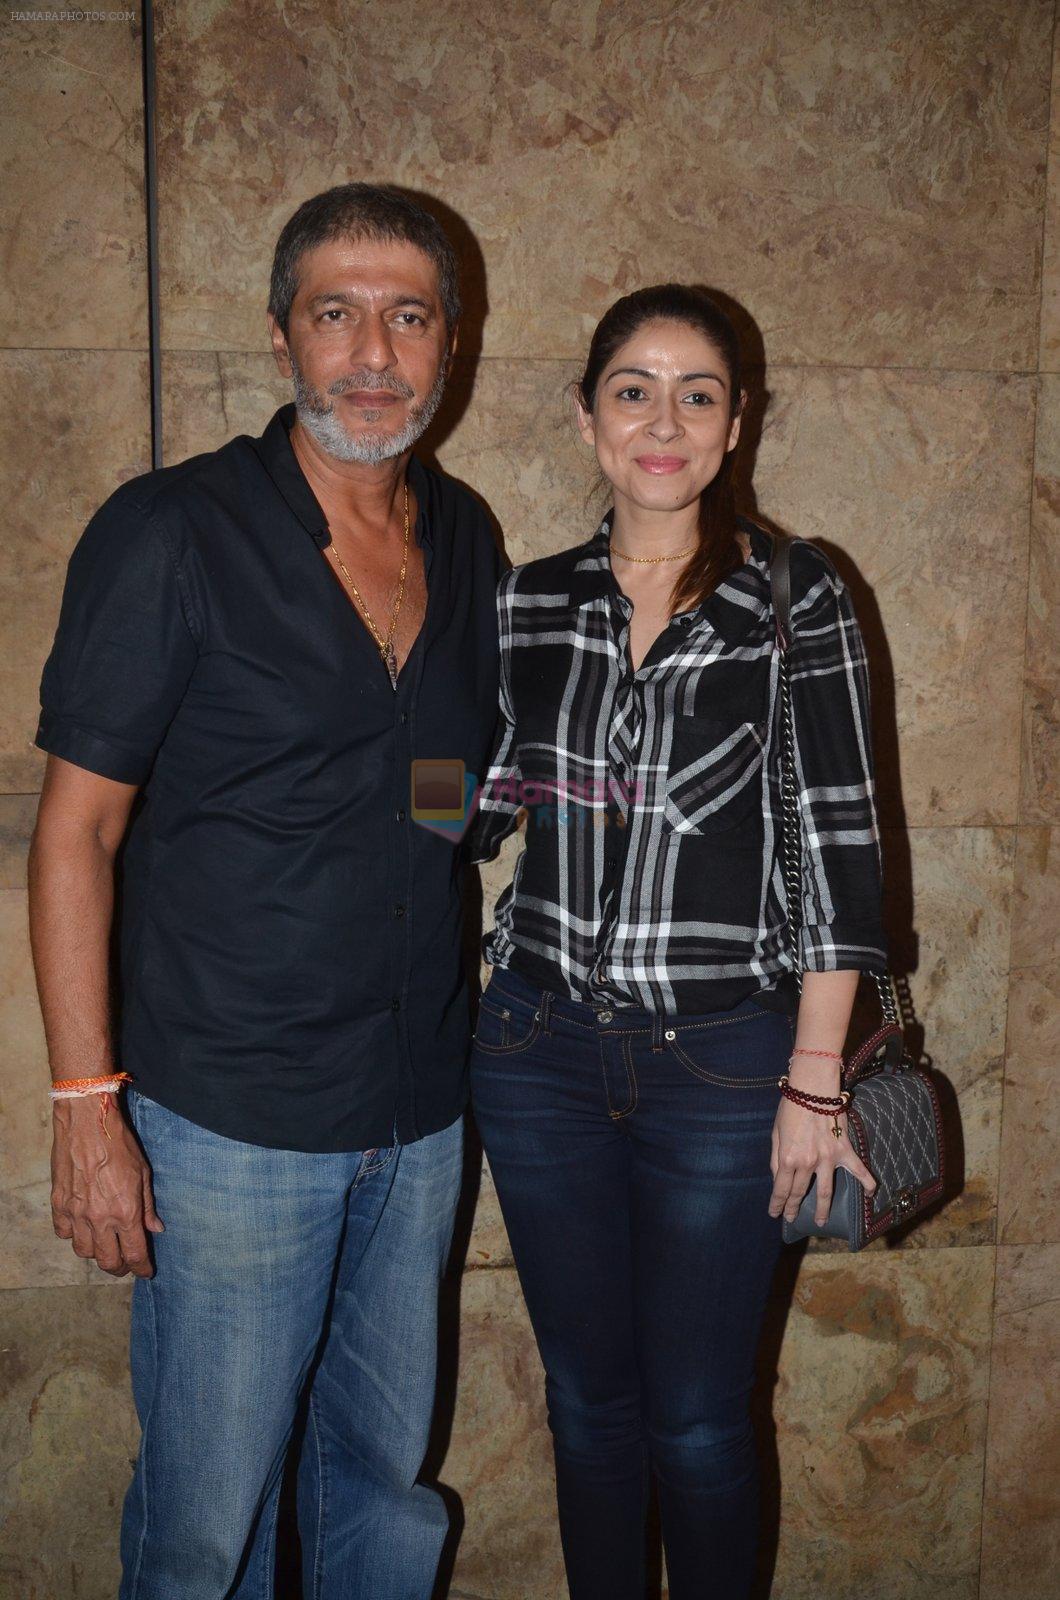 Chunky Pandey at Freaky Ali screening on 7th Sept 2016